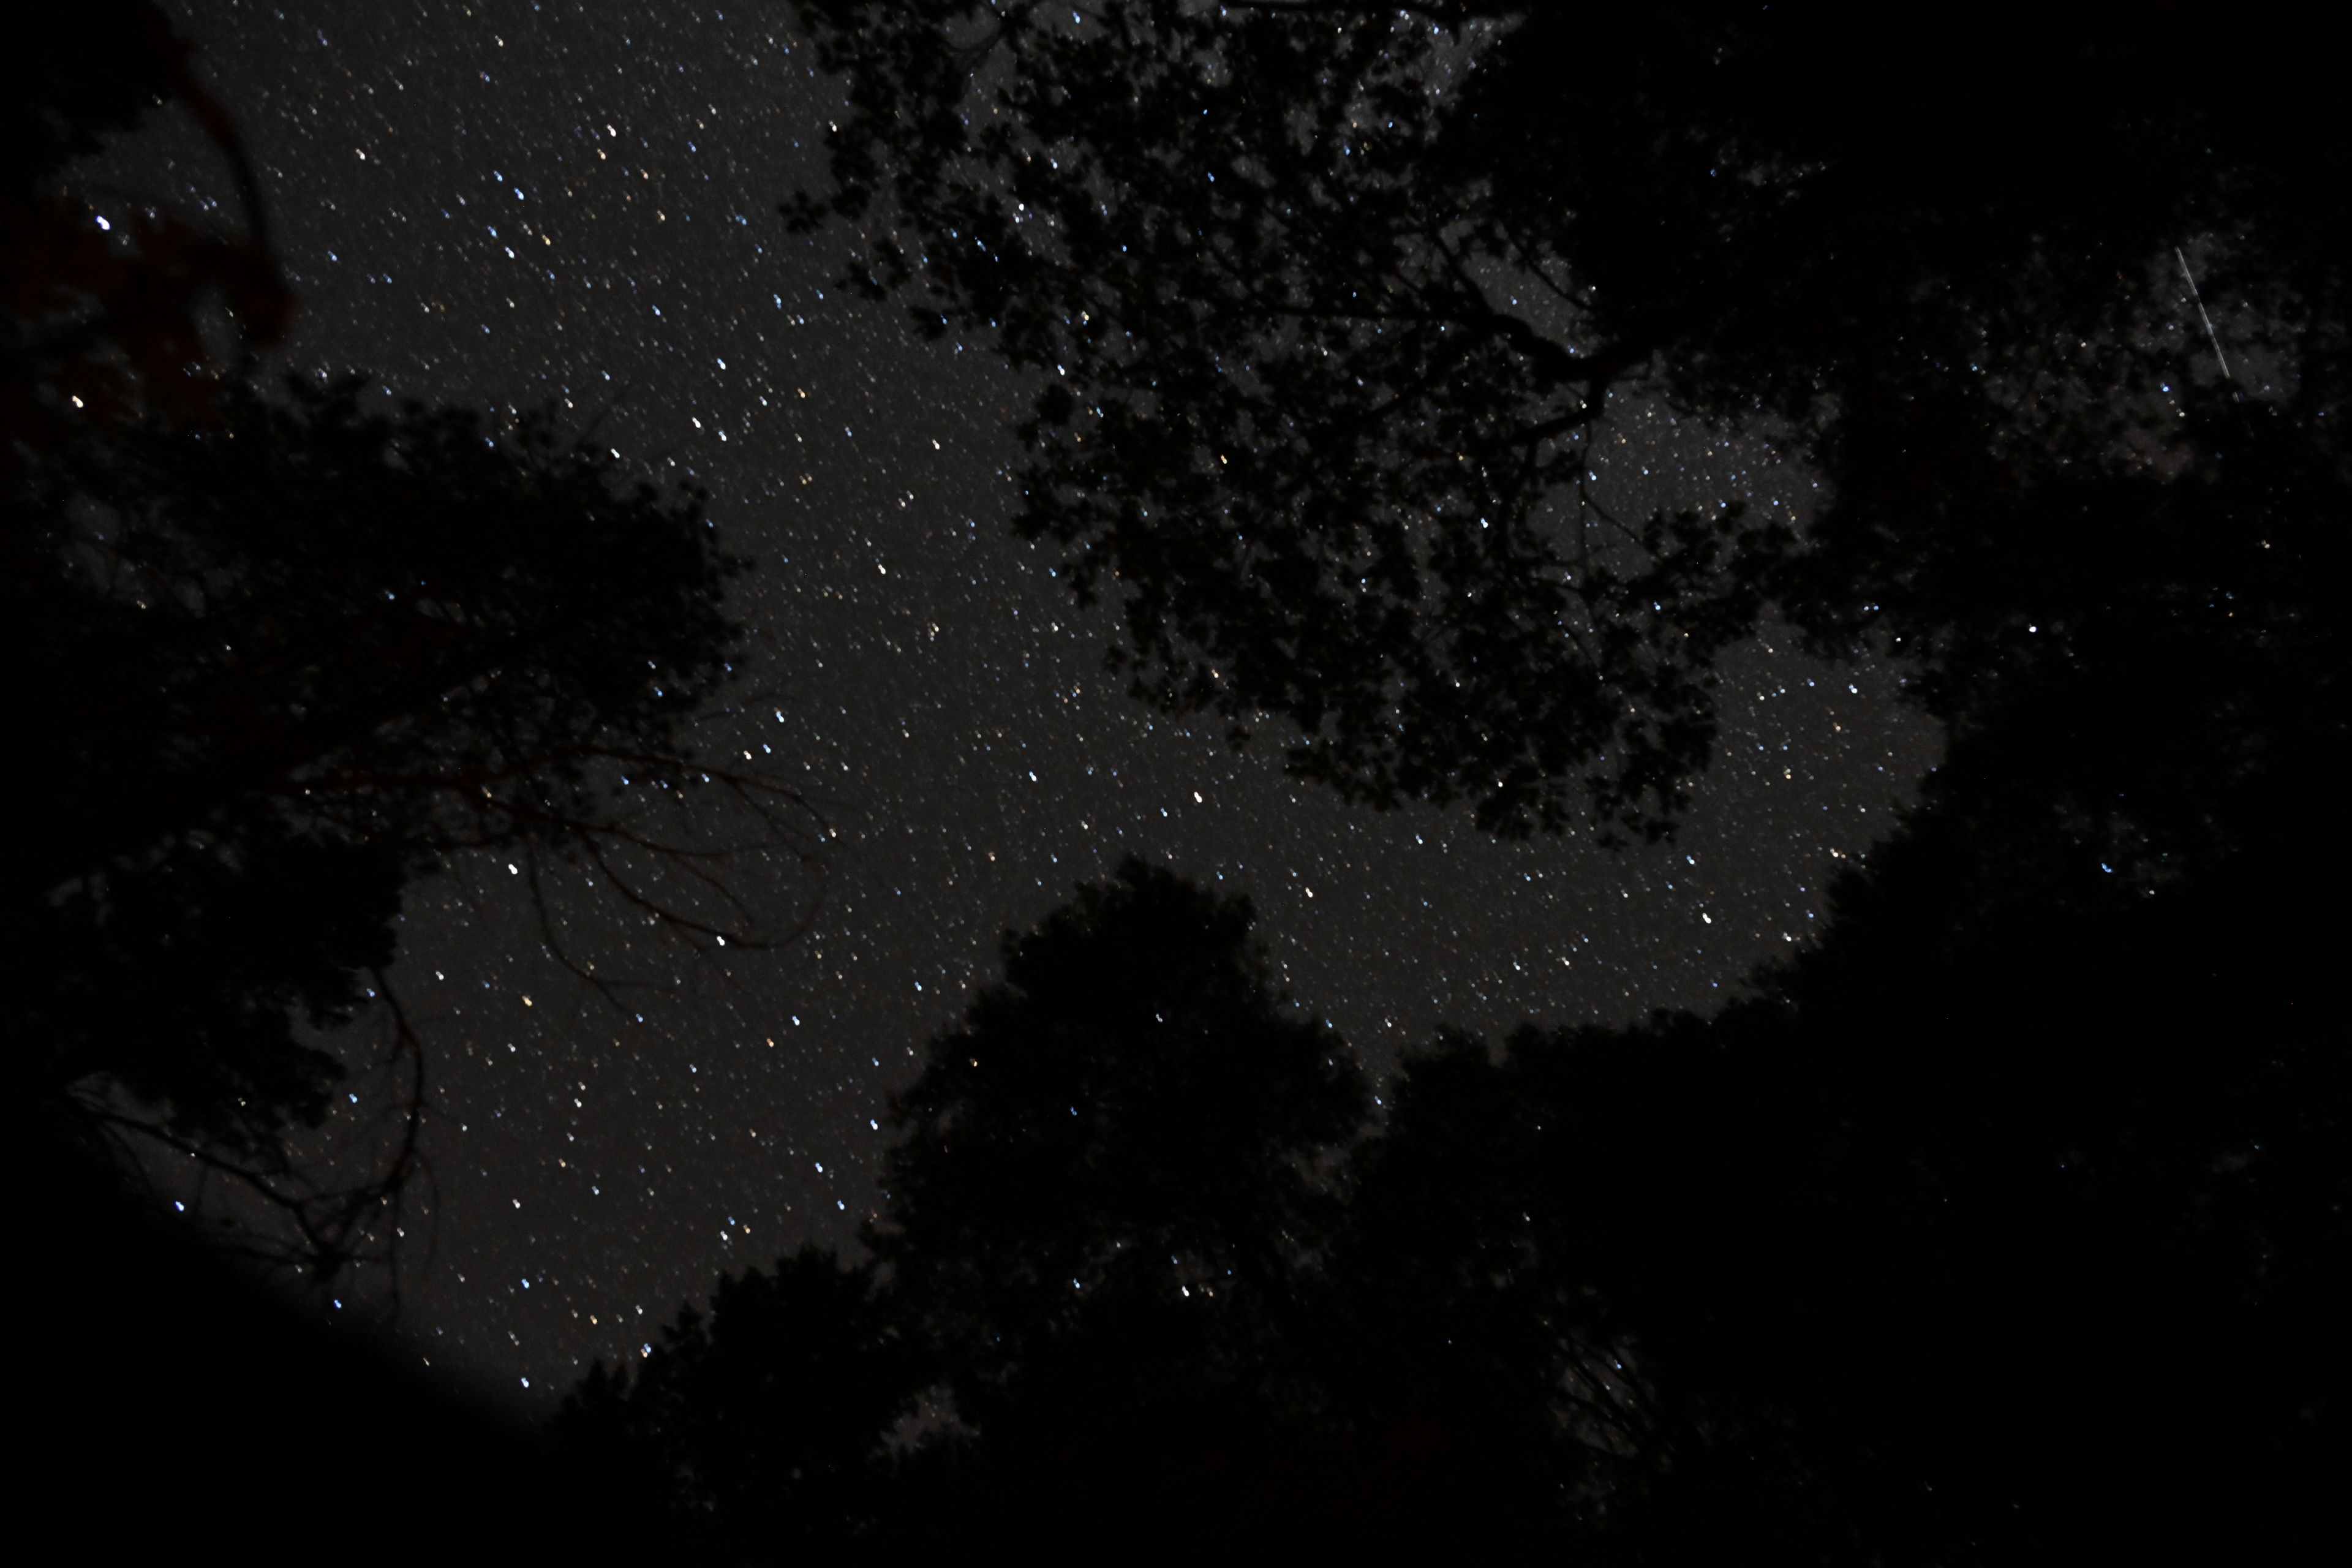 Night sky above the Deafy Glade Trail, 8W26, in Mendocino National Forest.